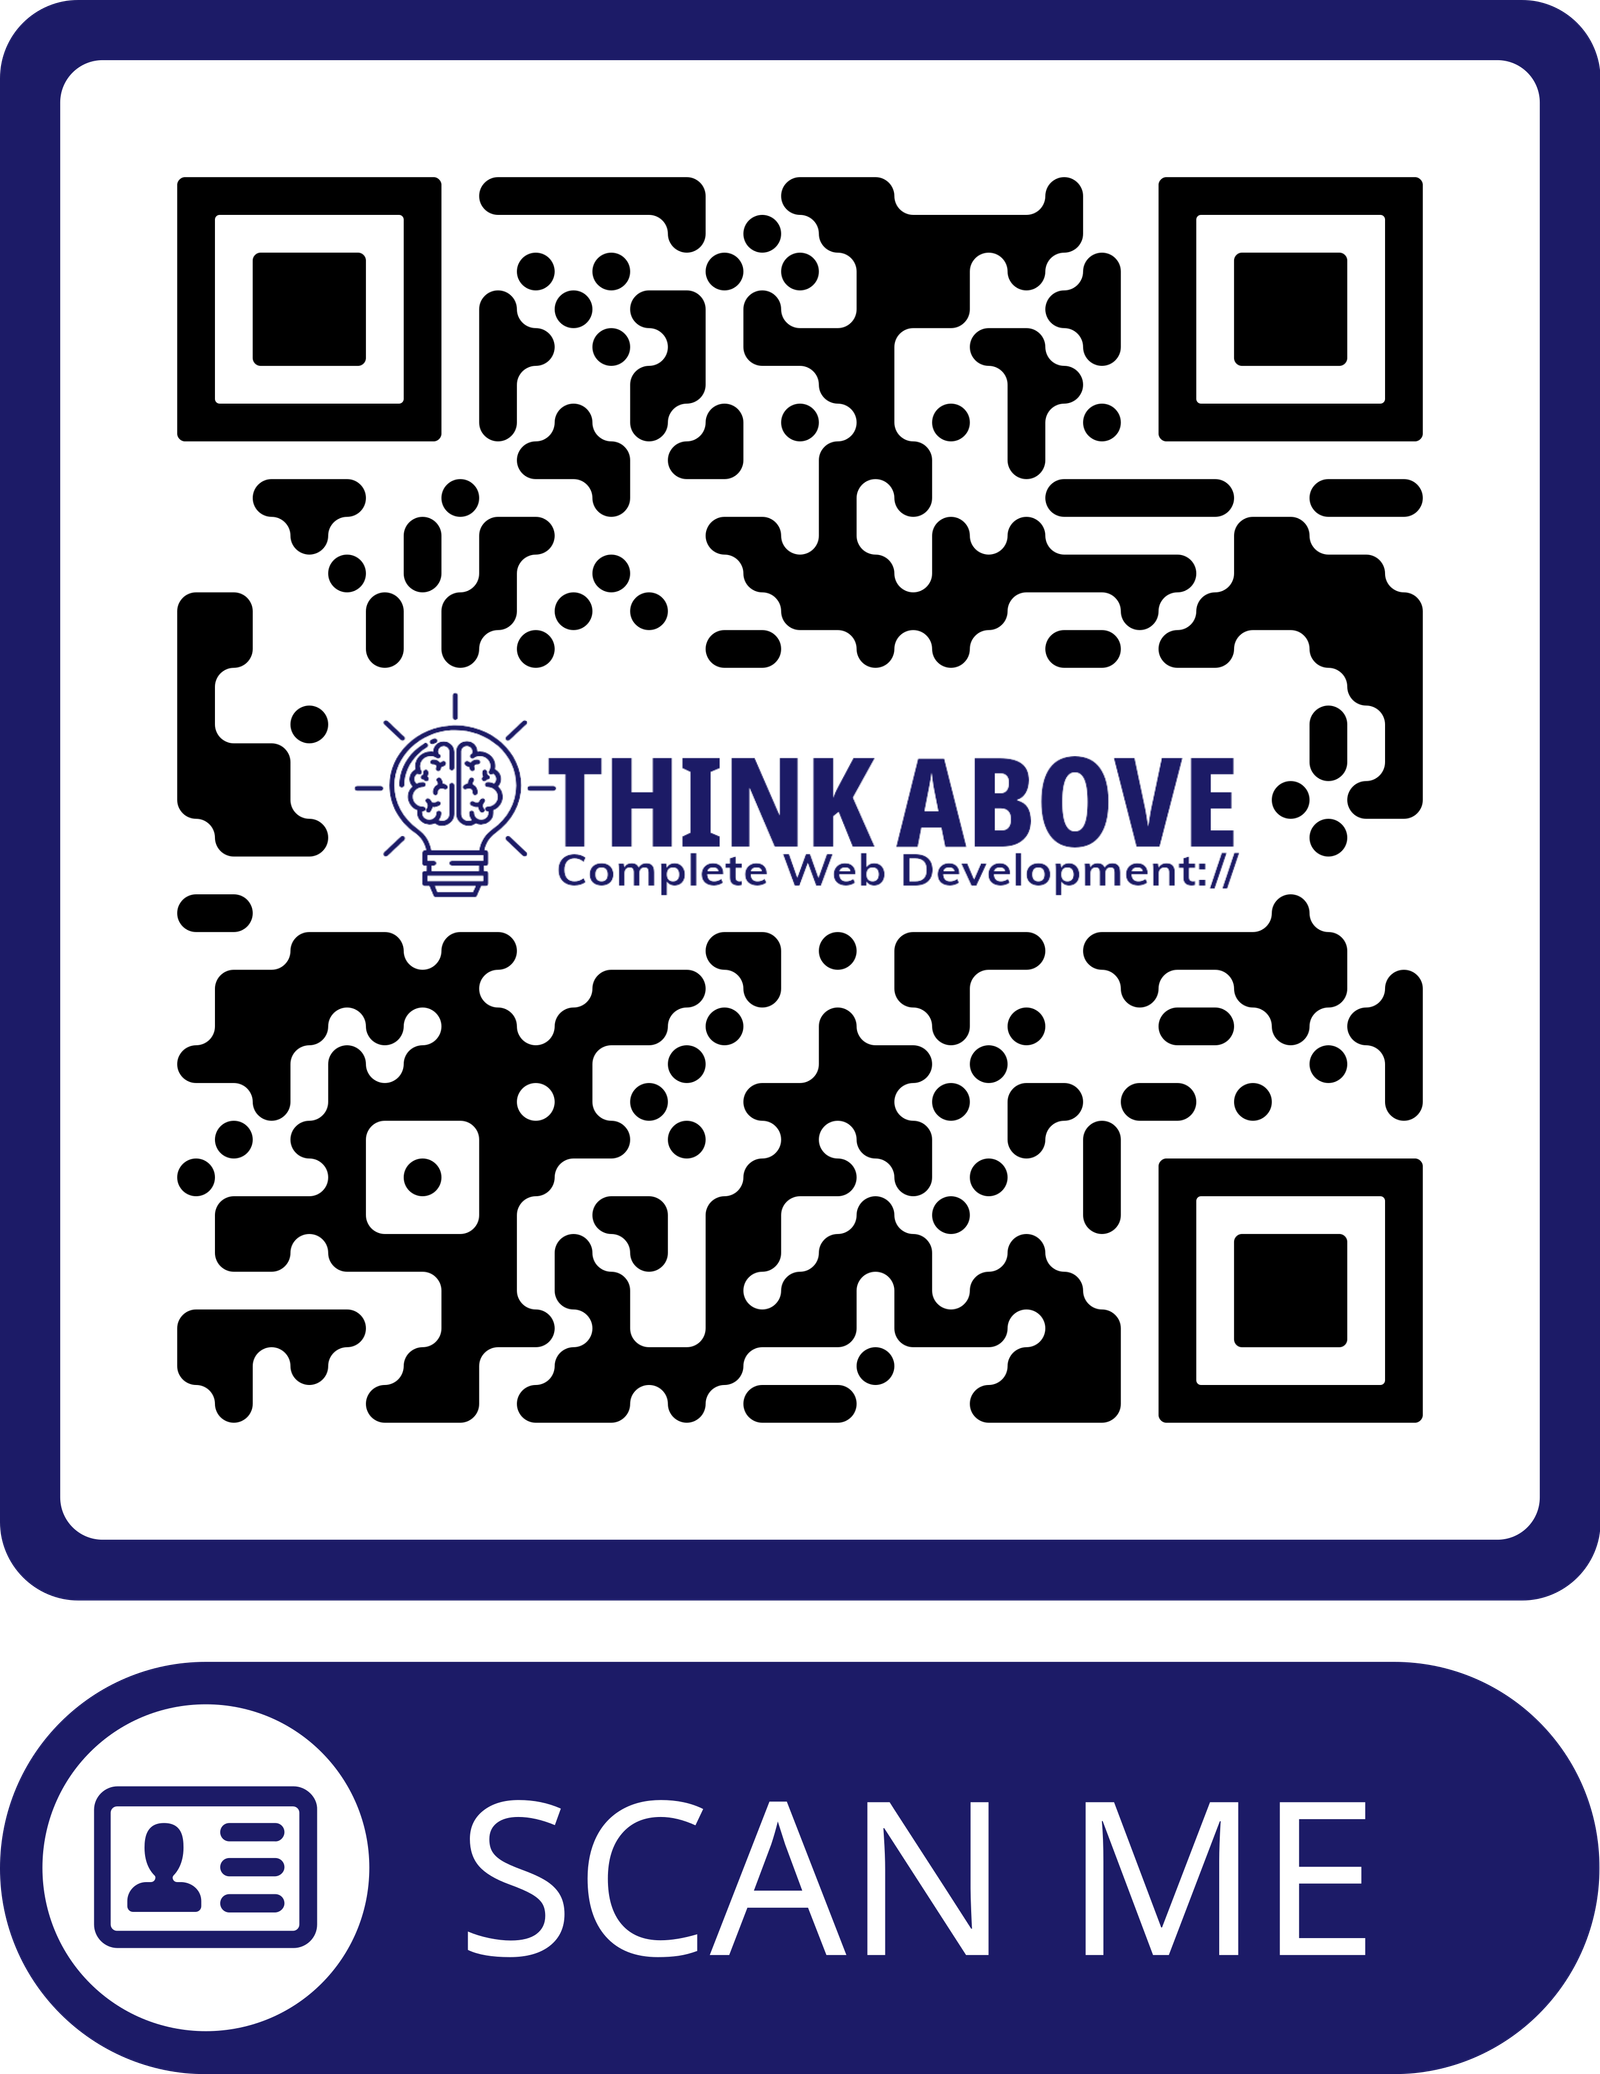 Scan the URL code to get in touch with Think Above and Mike Payne